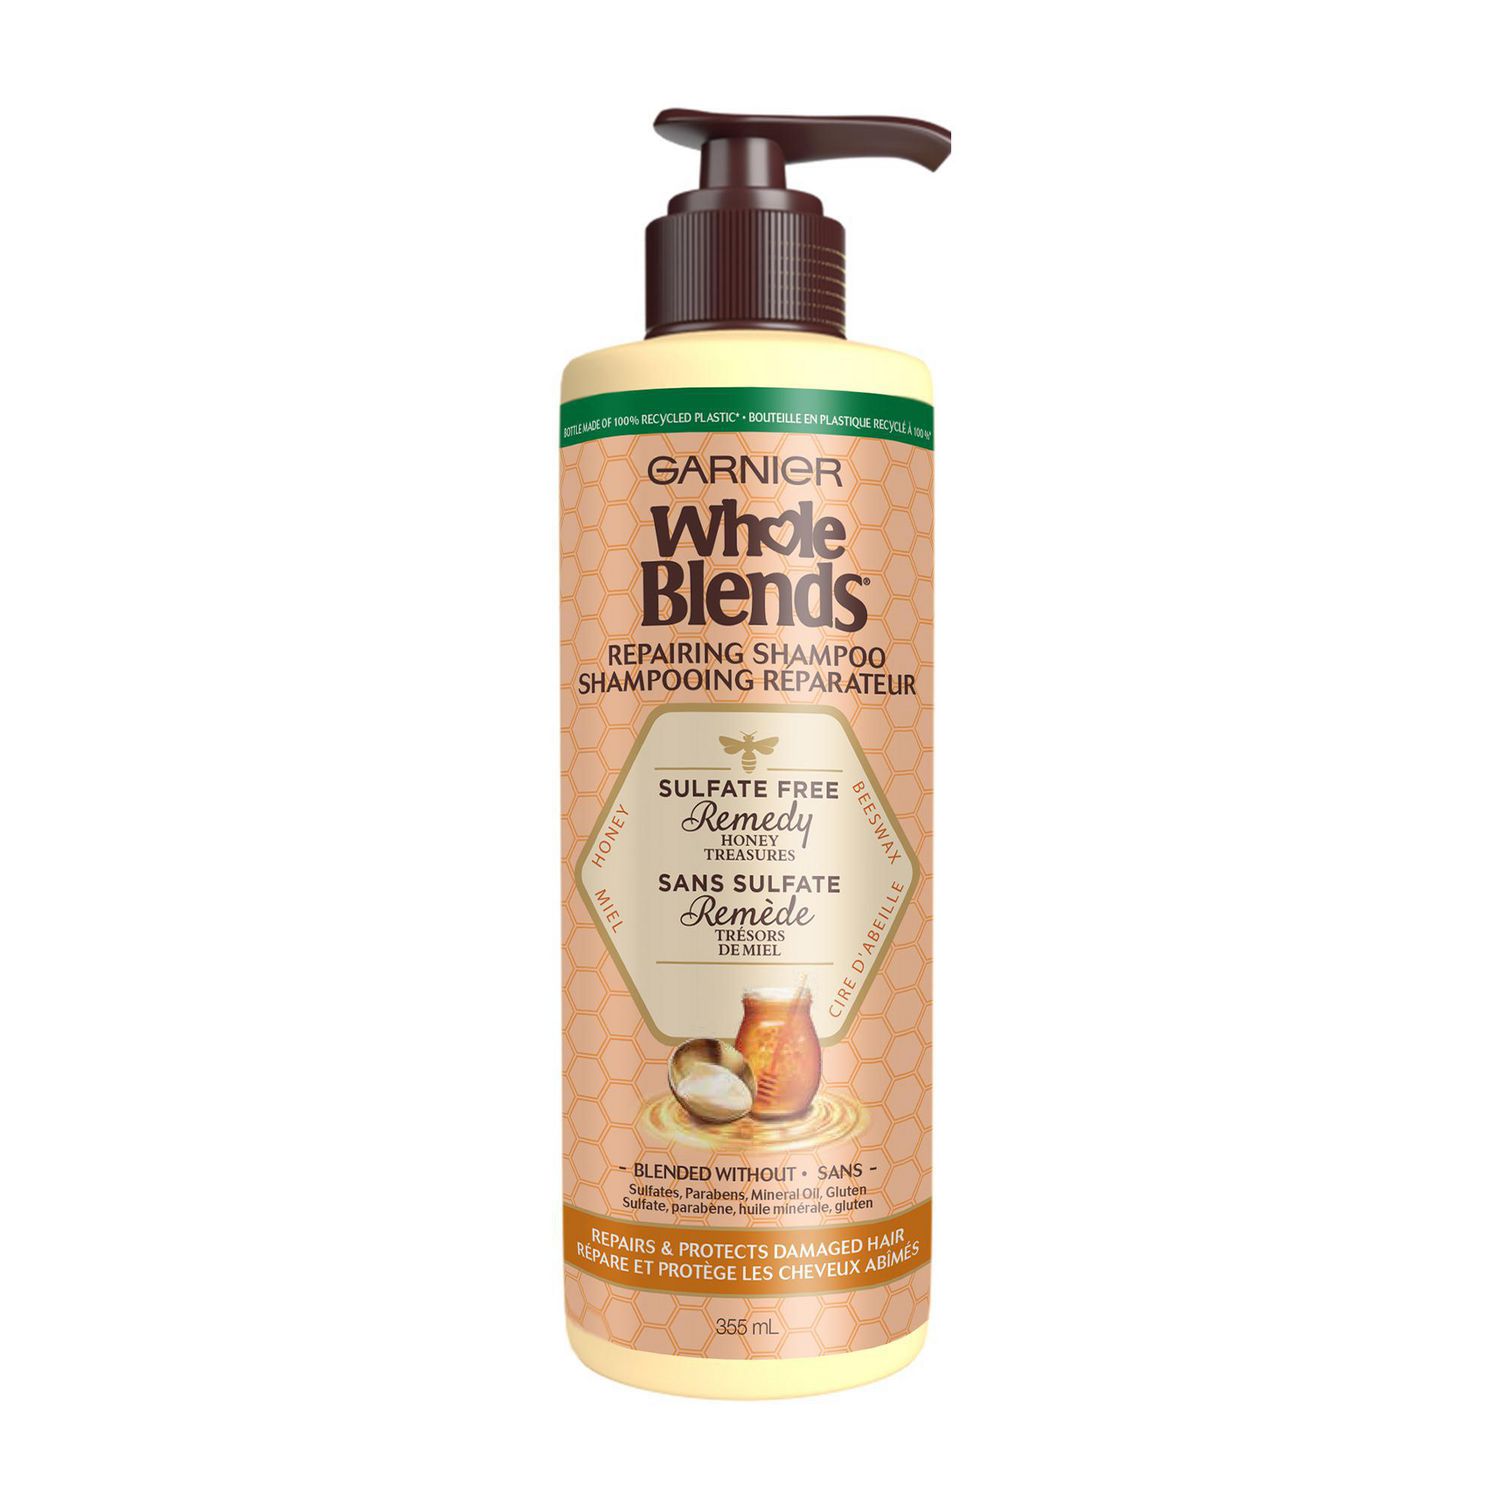 Garnier Whole Blends Sulfate Free Shampoo, For Damaged Hair, Up To 72